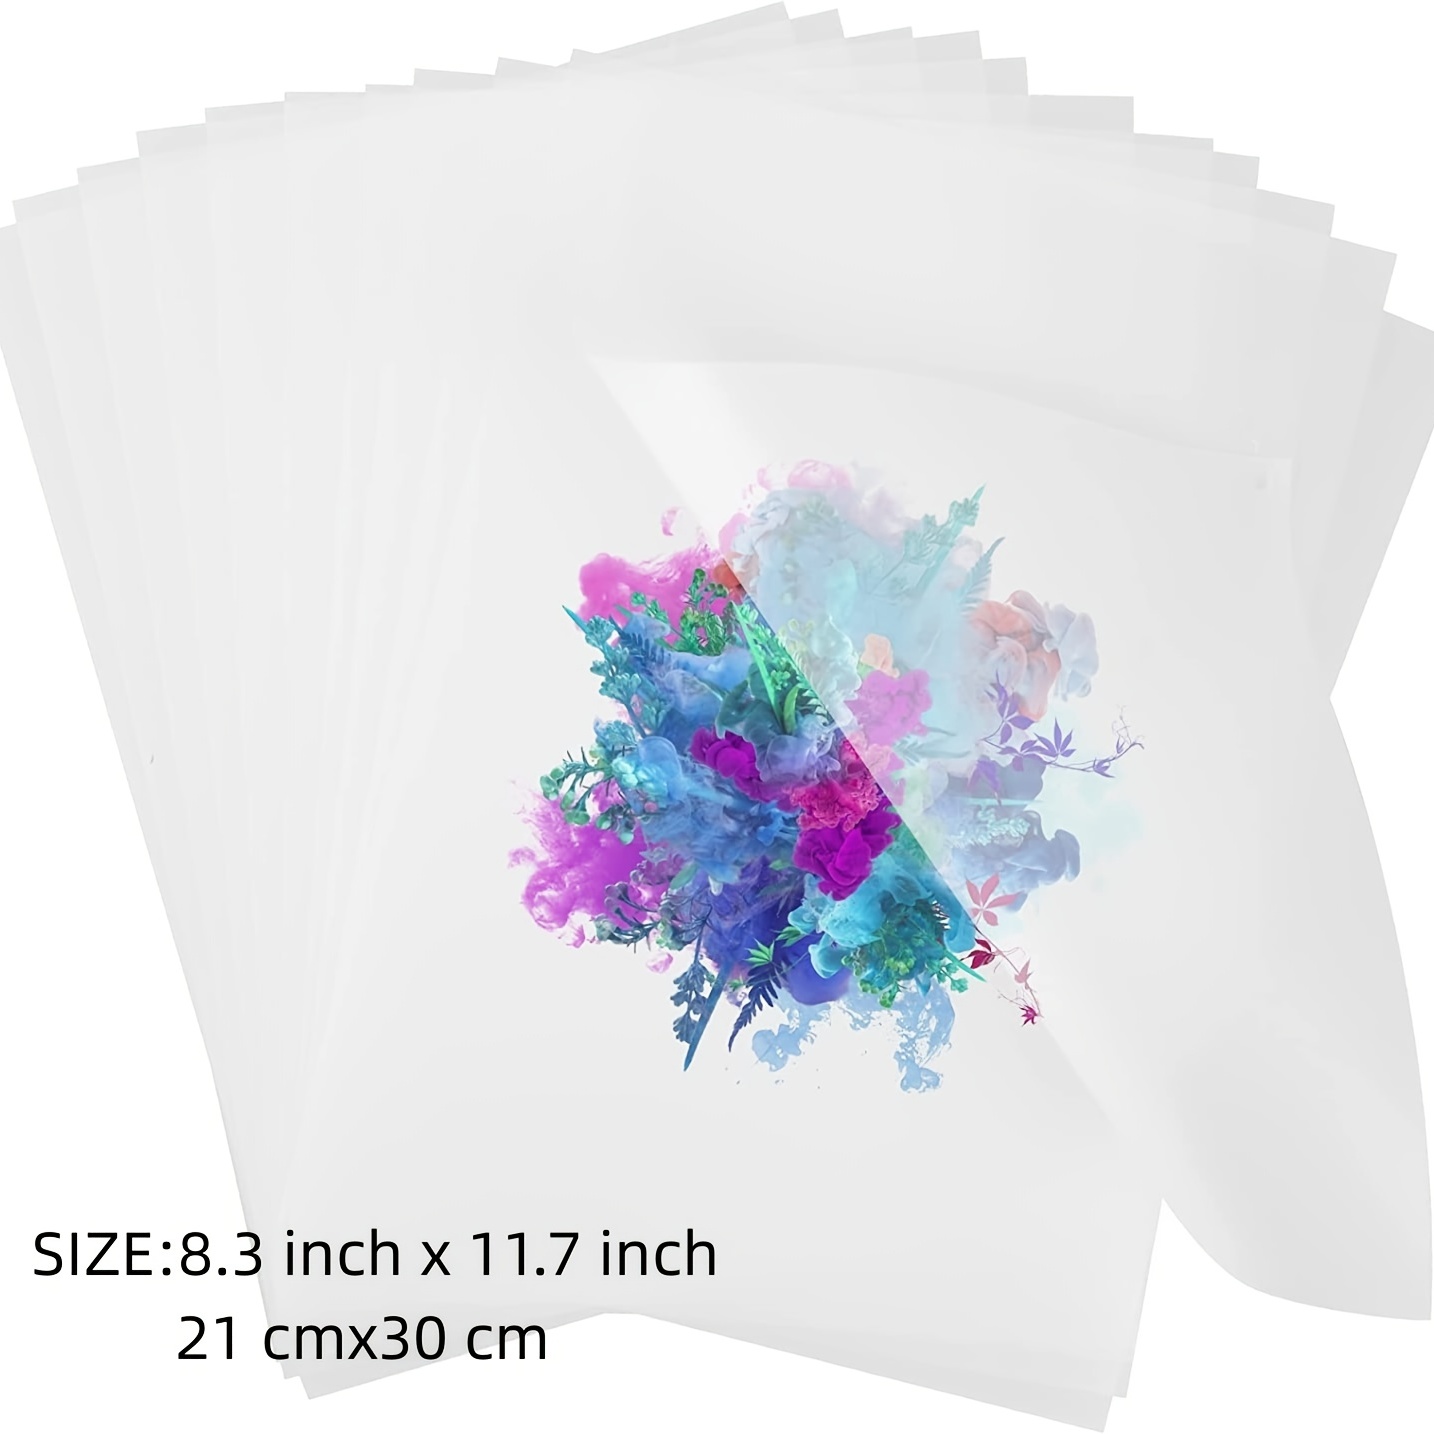 GOZYE Premium DTF Transfer Film - 100 Sheets A4 Matte Pet Heat Transfer Paper for Direct-to-Film Printing on T-shirts Textile- Size: A4 (8.3 x 11.7